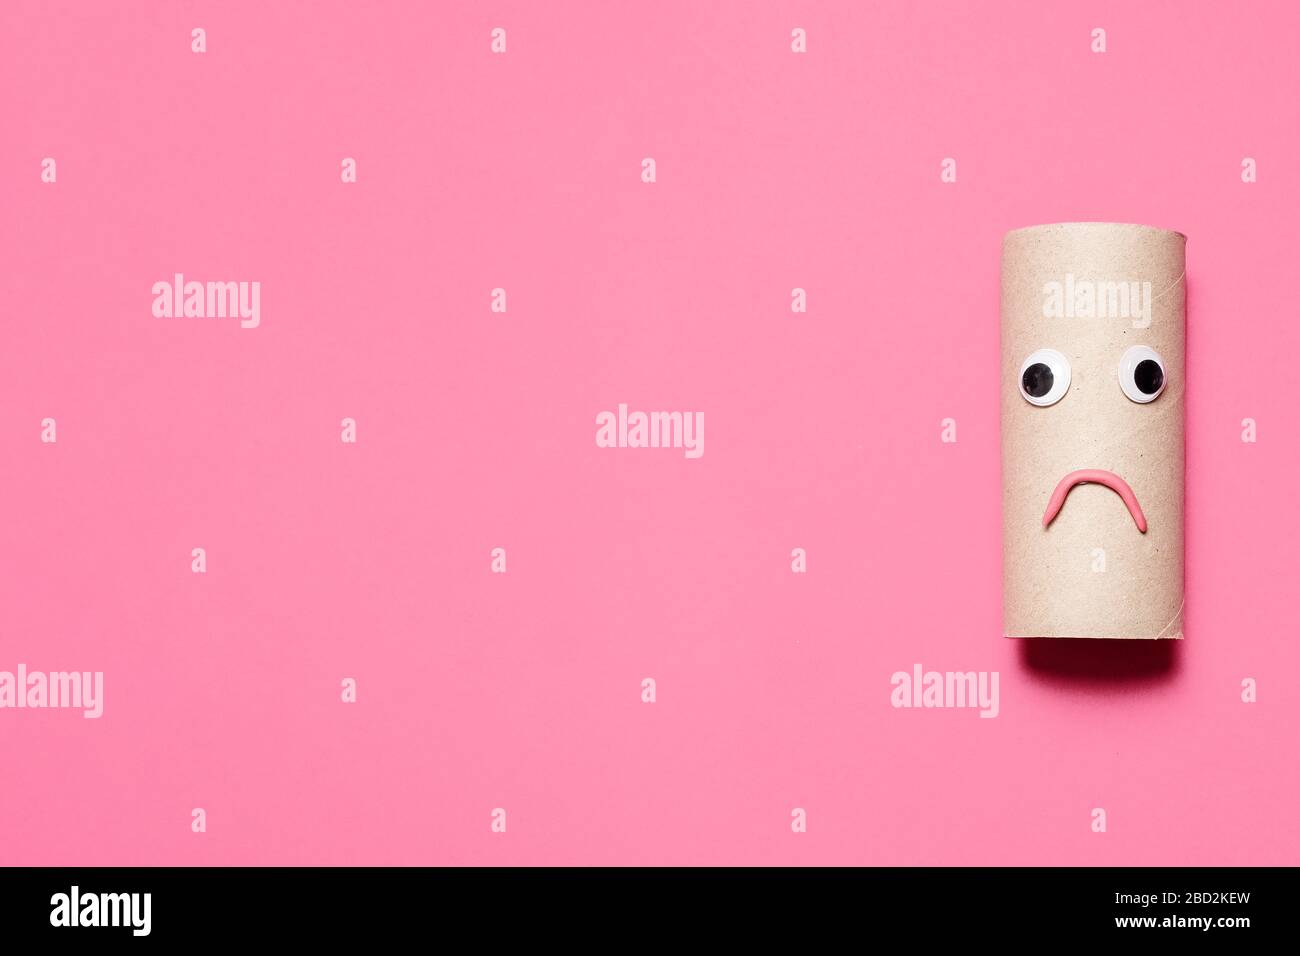 Sad and frowning empty roll of toilet paper with googly eyes and mouth on a pink background with copy space and room for text. Stock Photo